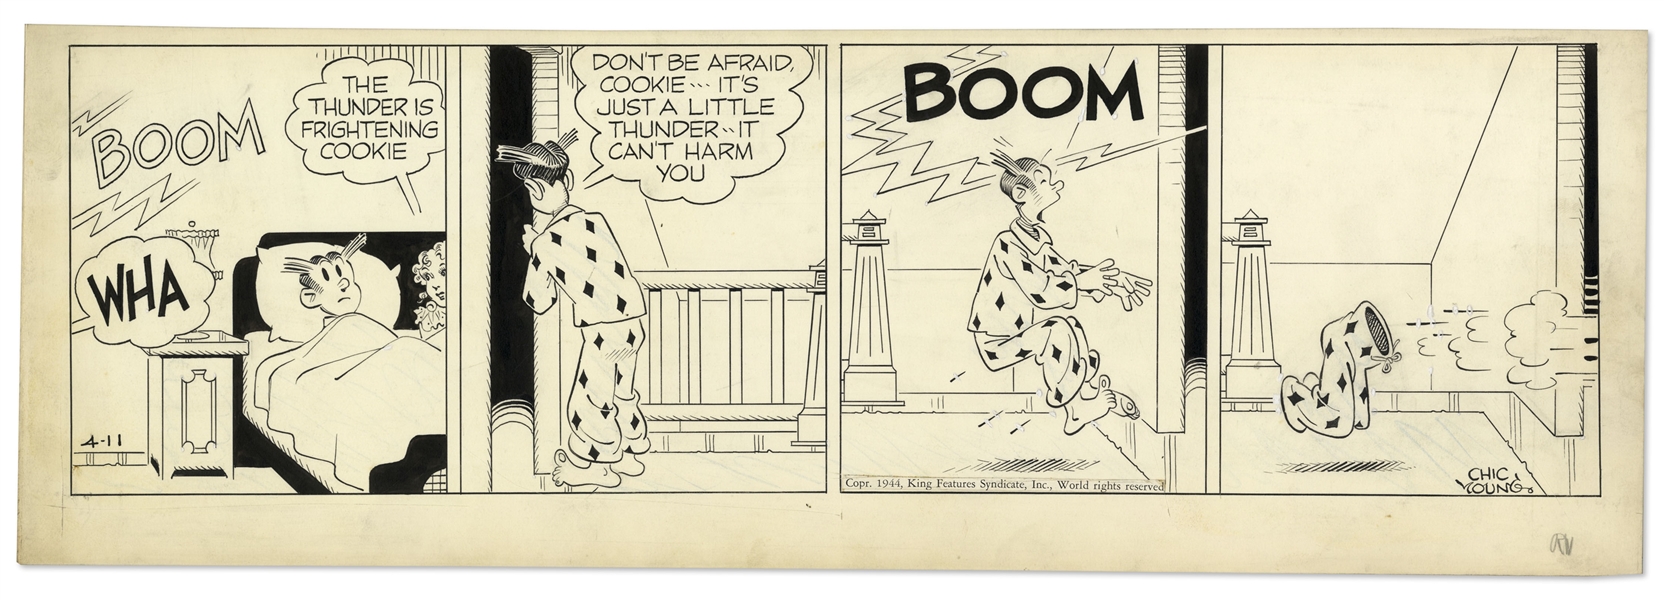 Chic Young Hand-Drawn ''Blondie'' Comic Strip From 1944 Titled ''Keep Your Shirt On, Cookie!''